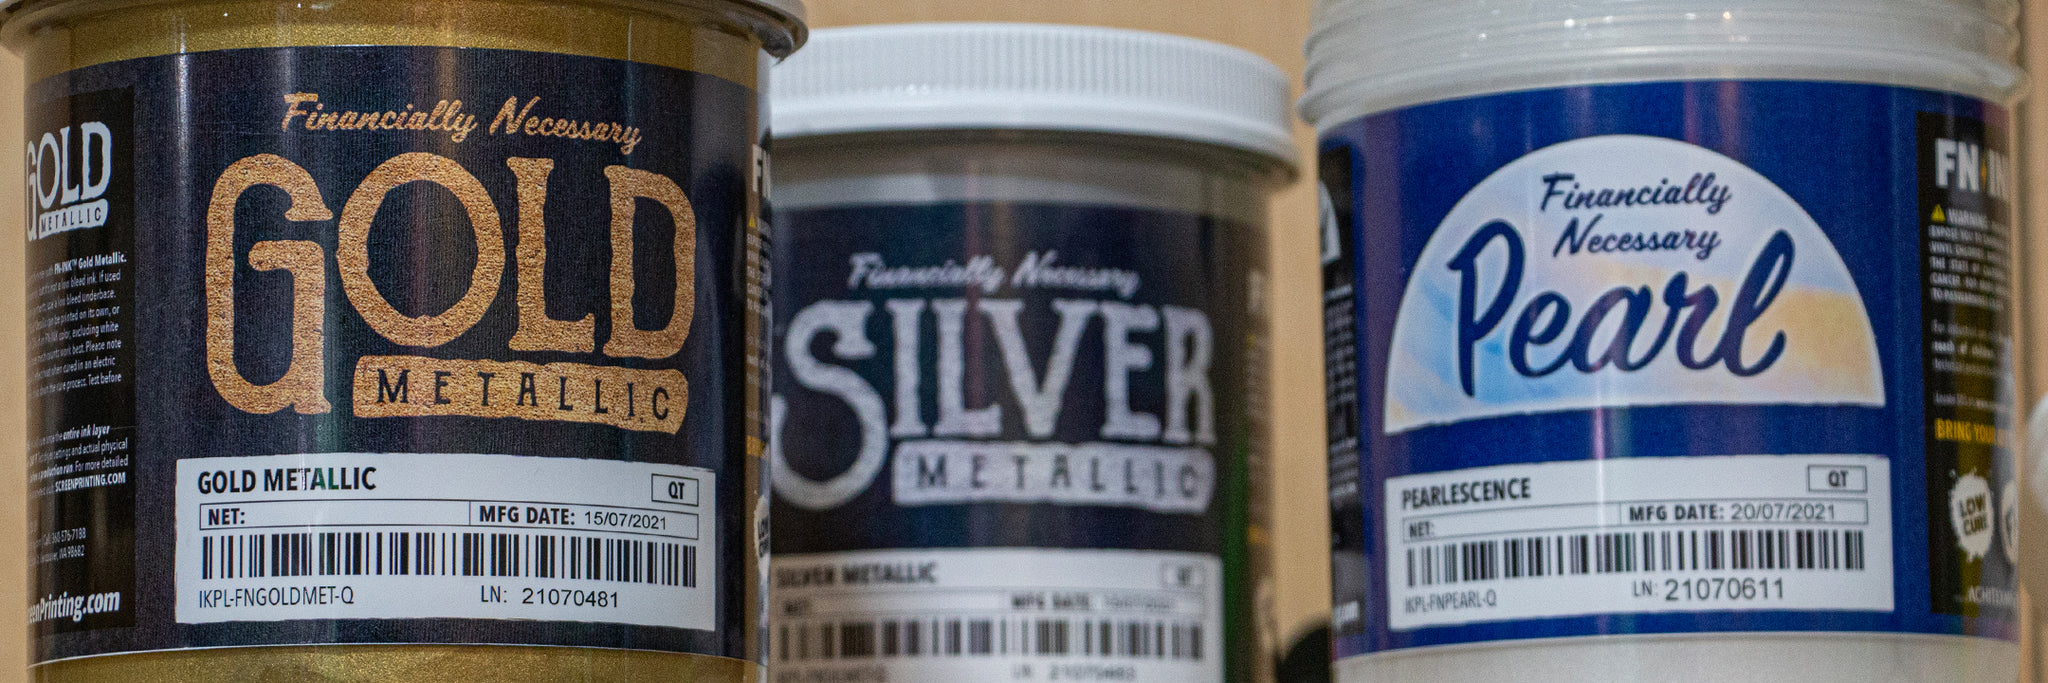 3 METALLIC SCREEN PRINTING INKS EVERY PRINTER SHOULD HAVE IN THEIR ARSENAL